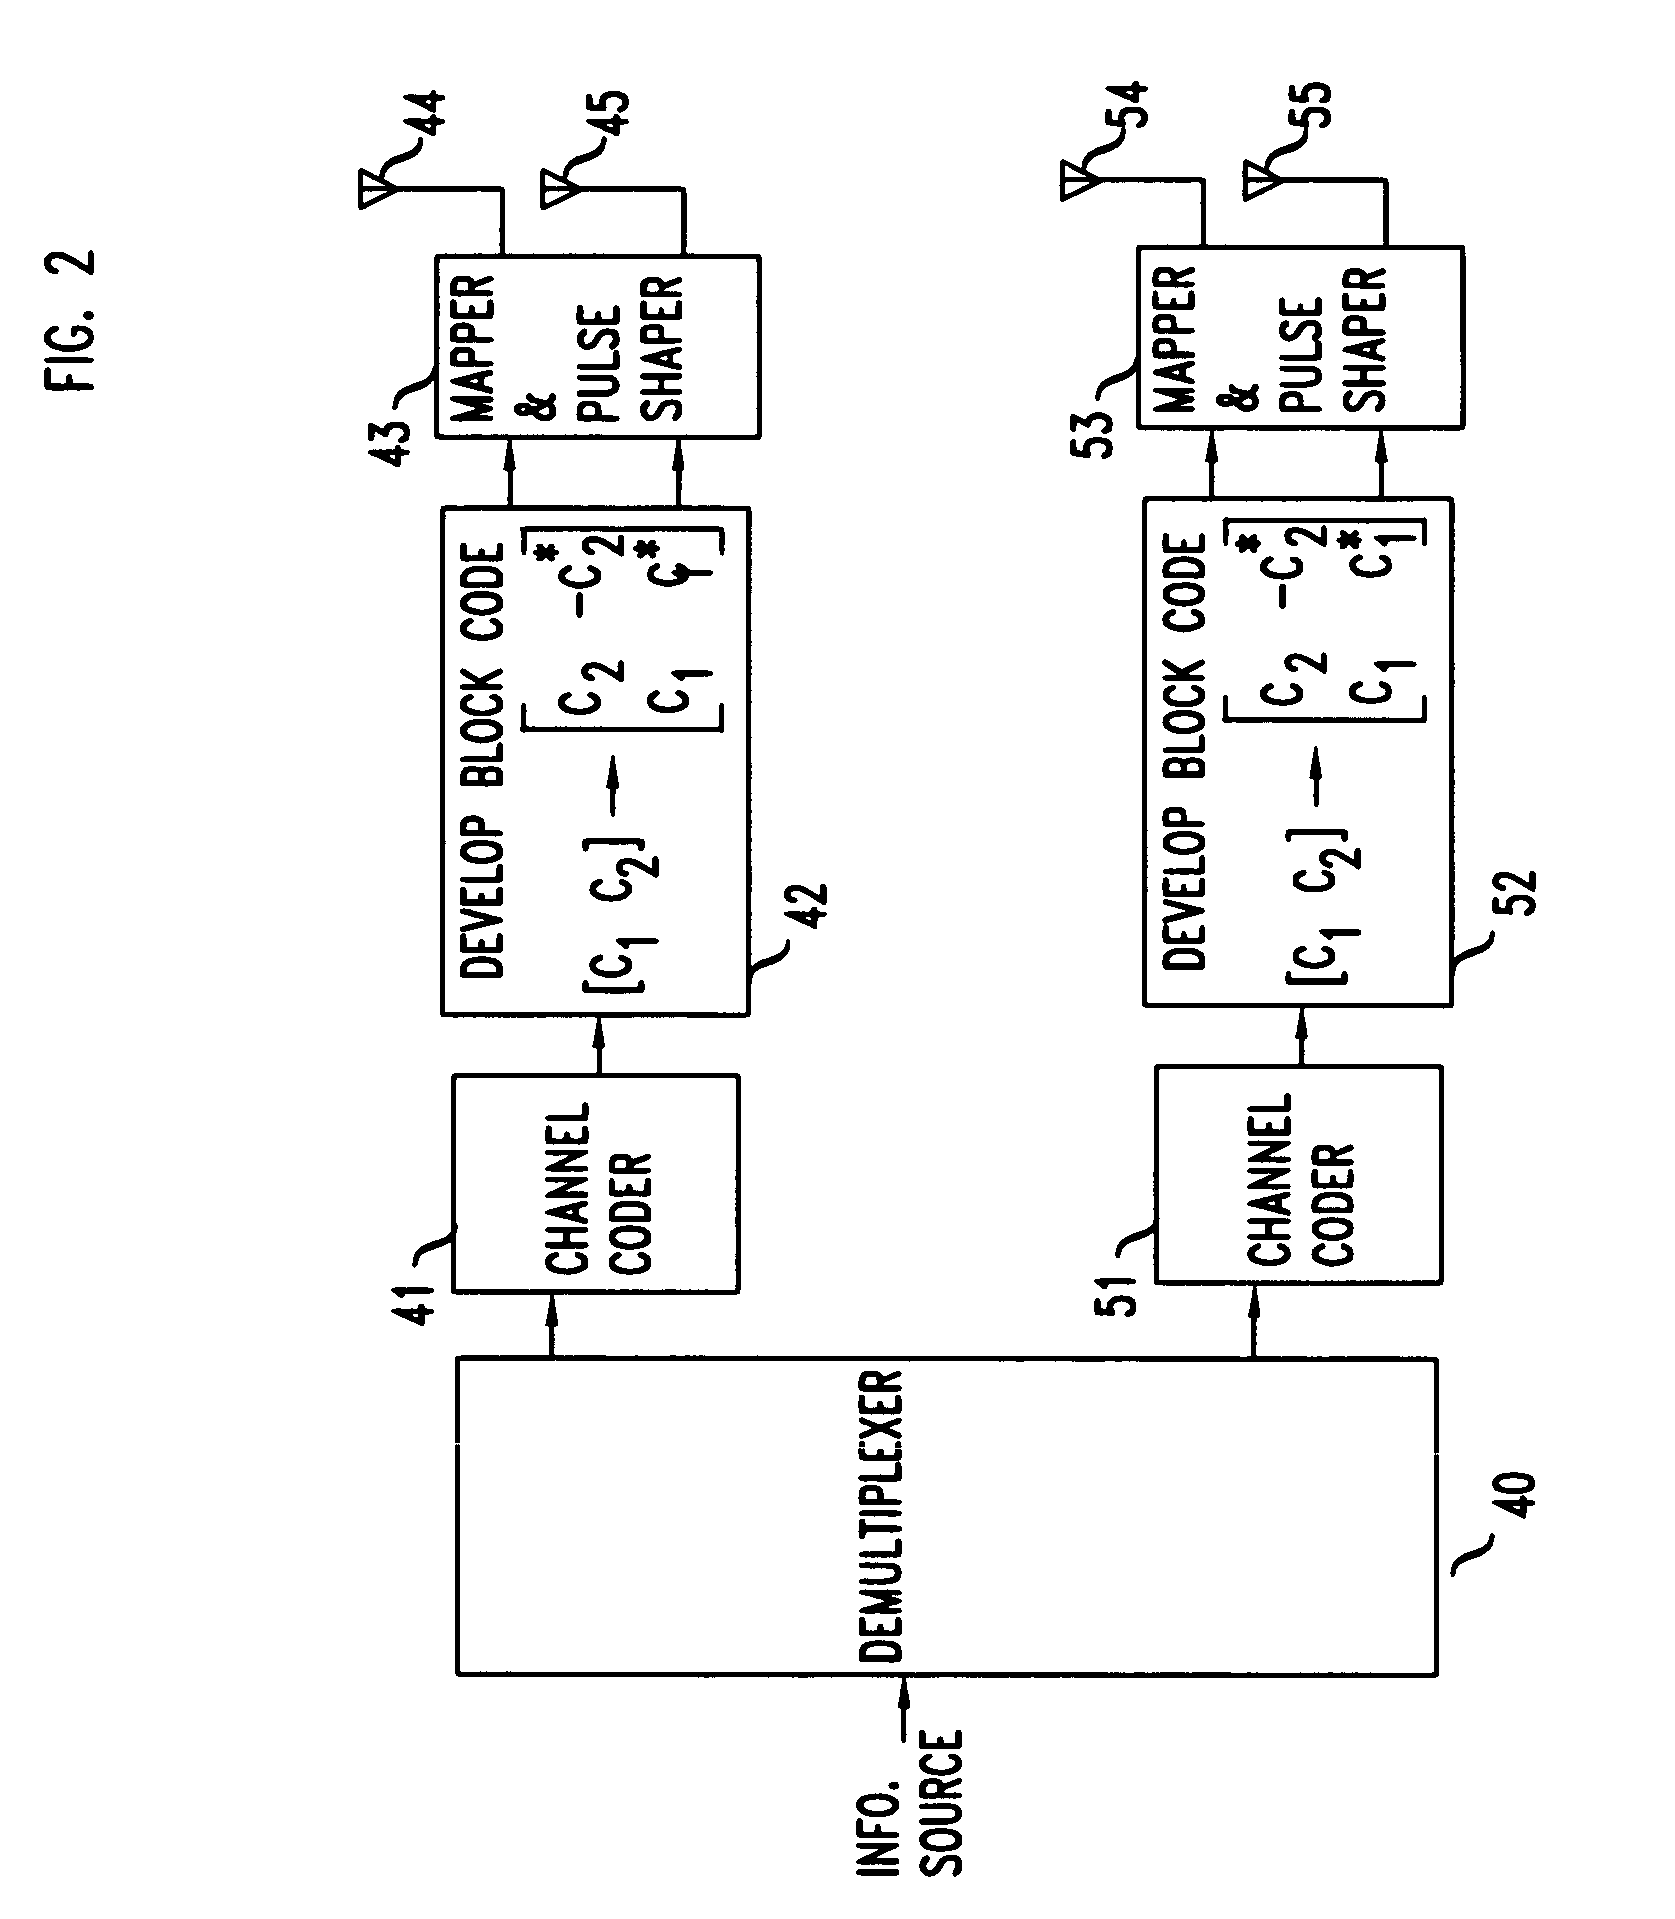 Combined channel coding and space-time block coding in a multi-antenna arrangement